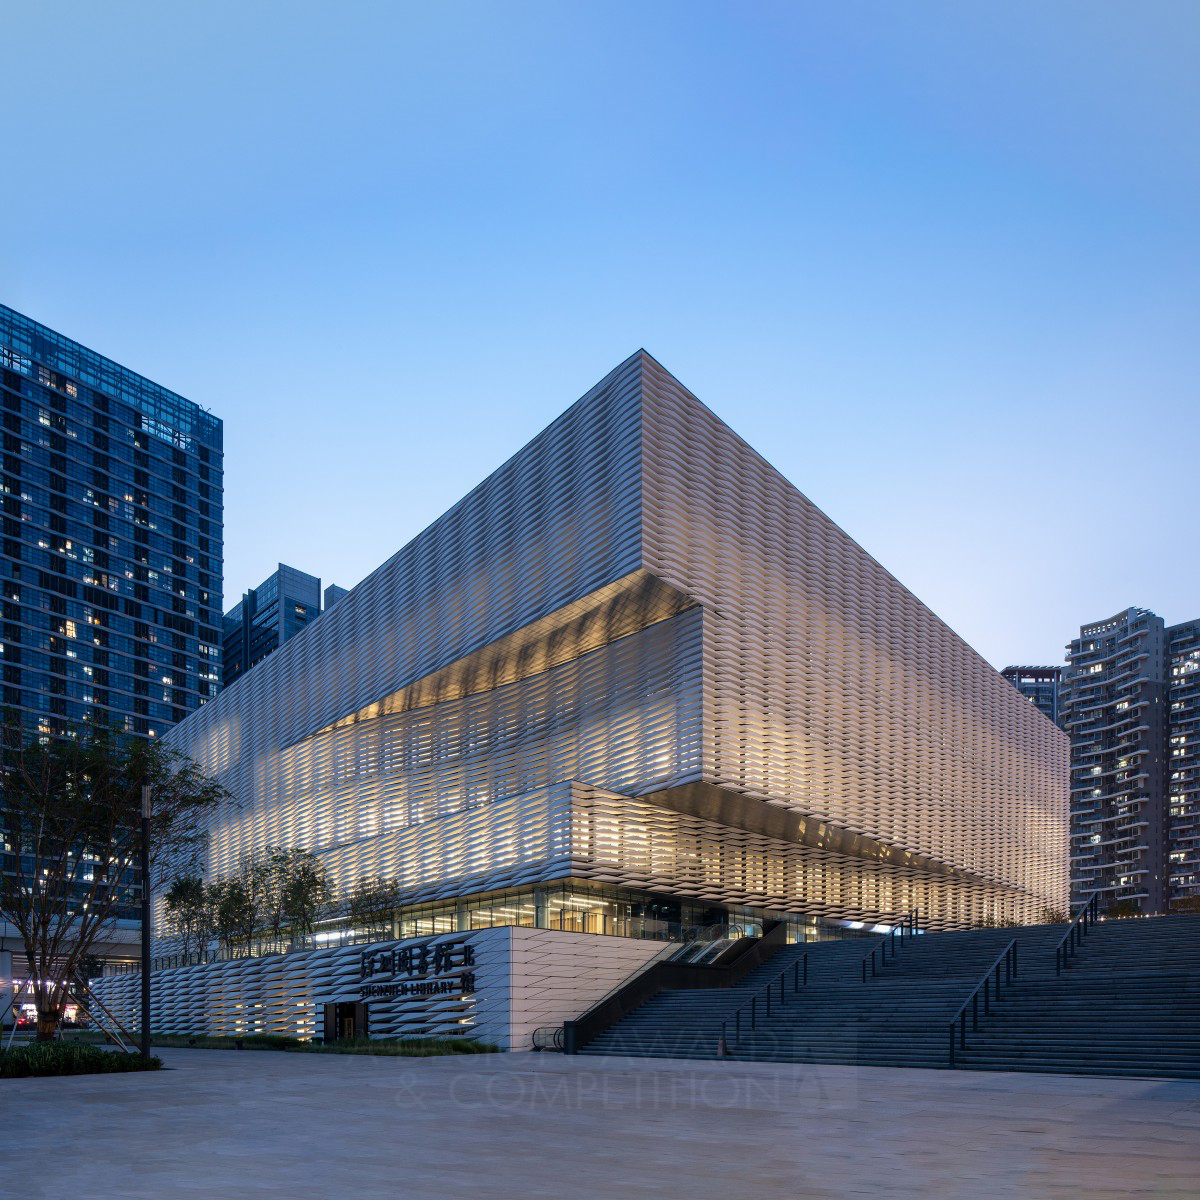 Zhubo Design wins Platinum at the prestigious A' Architecture, Building and Structure Design Award with Shenzhen Art Museum New Venue and Library North Branch.